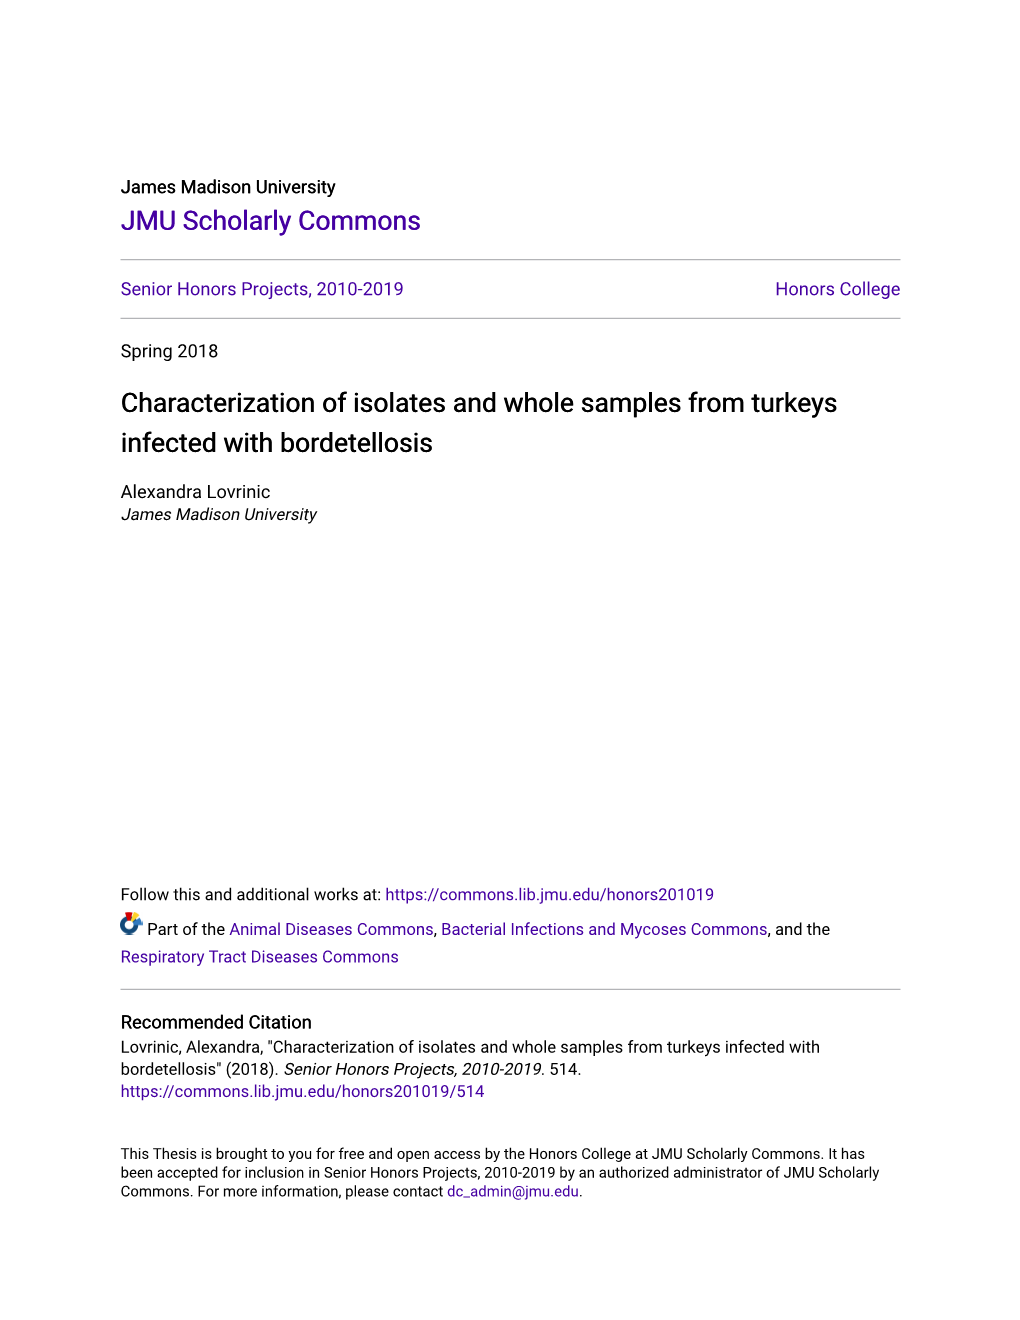 Characterization of Isolates and Whole Samples from Turkeys Infected with Bordetellosis